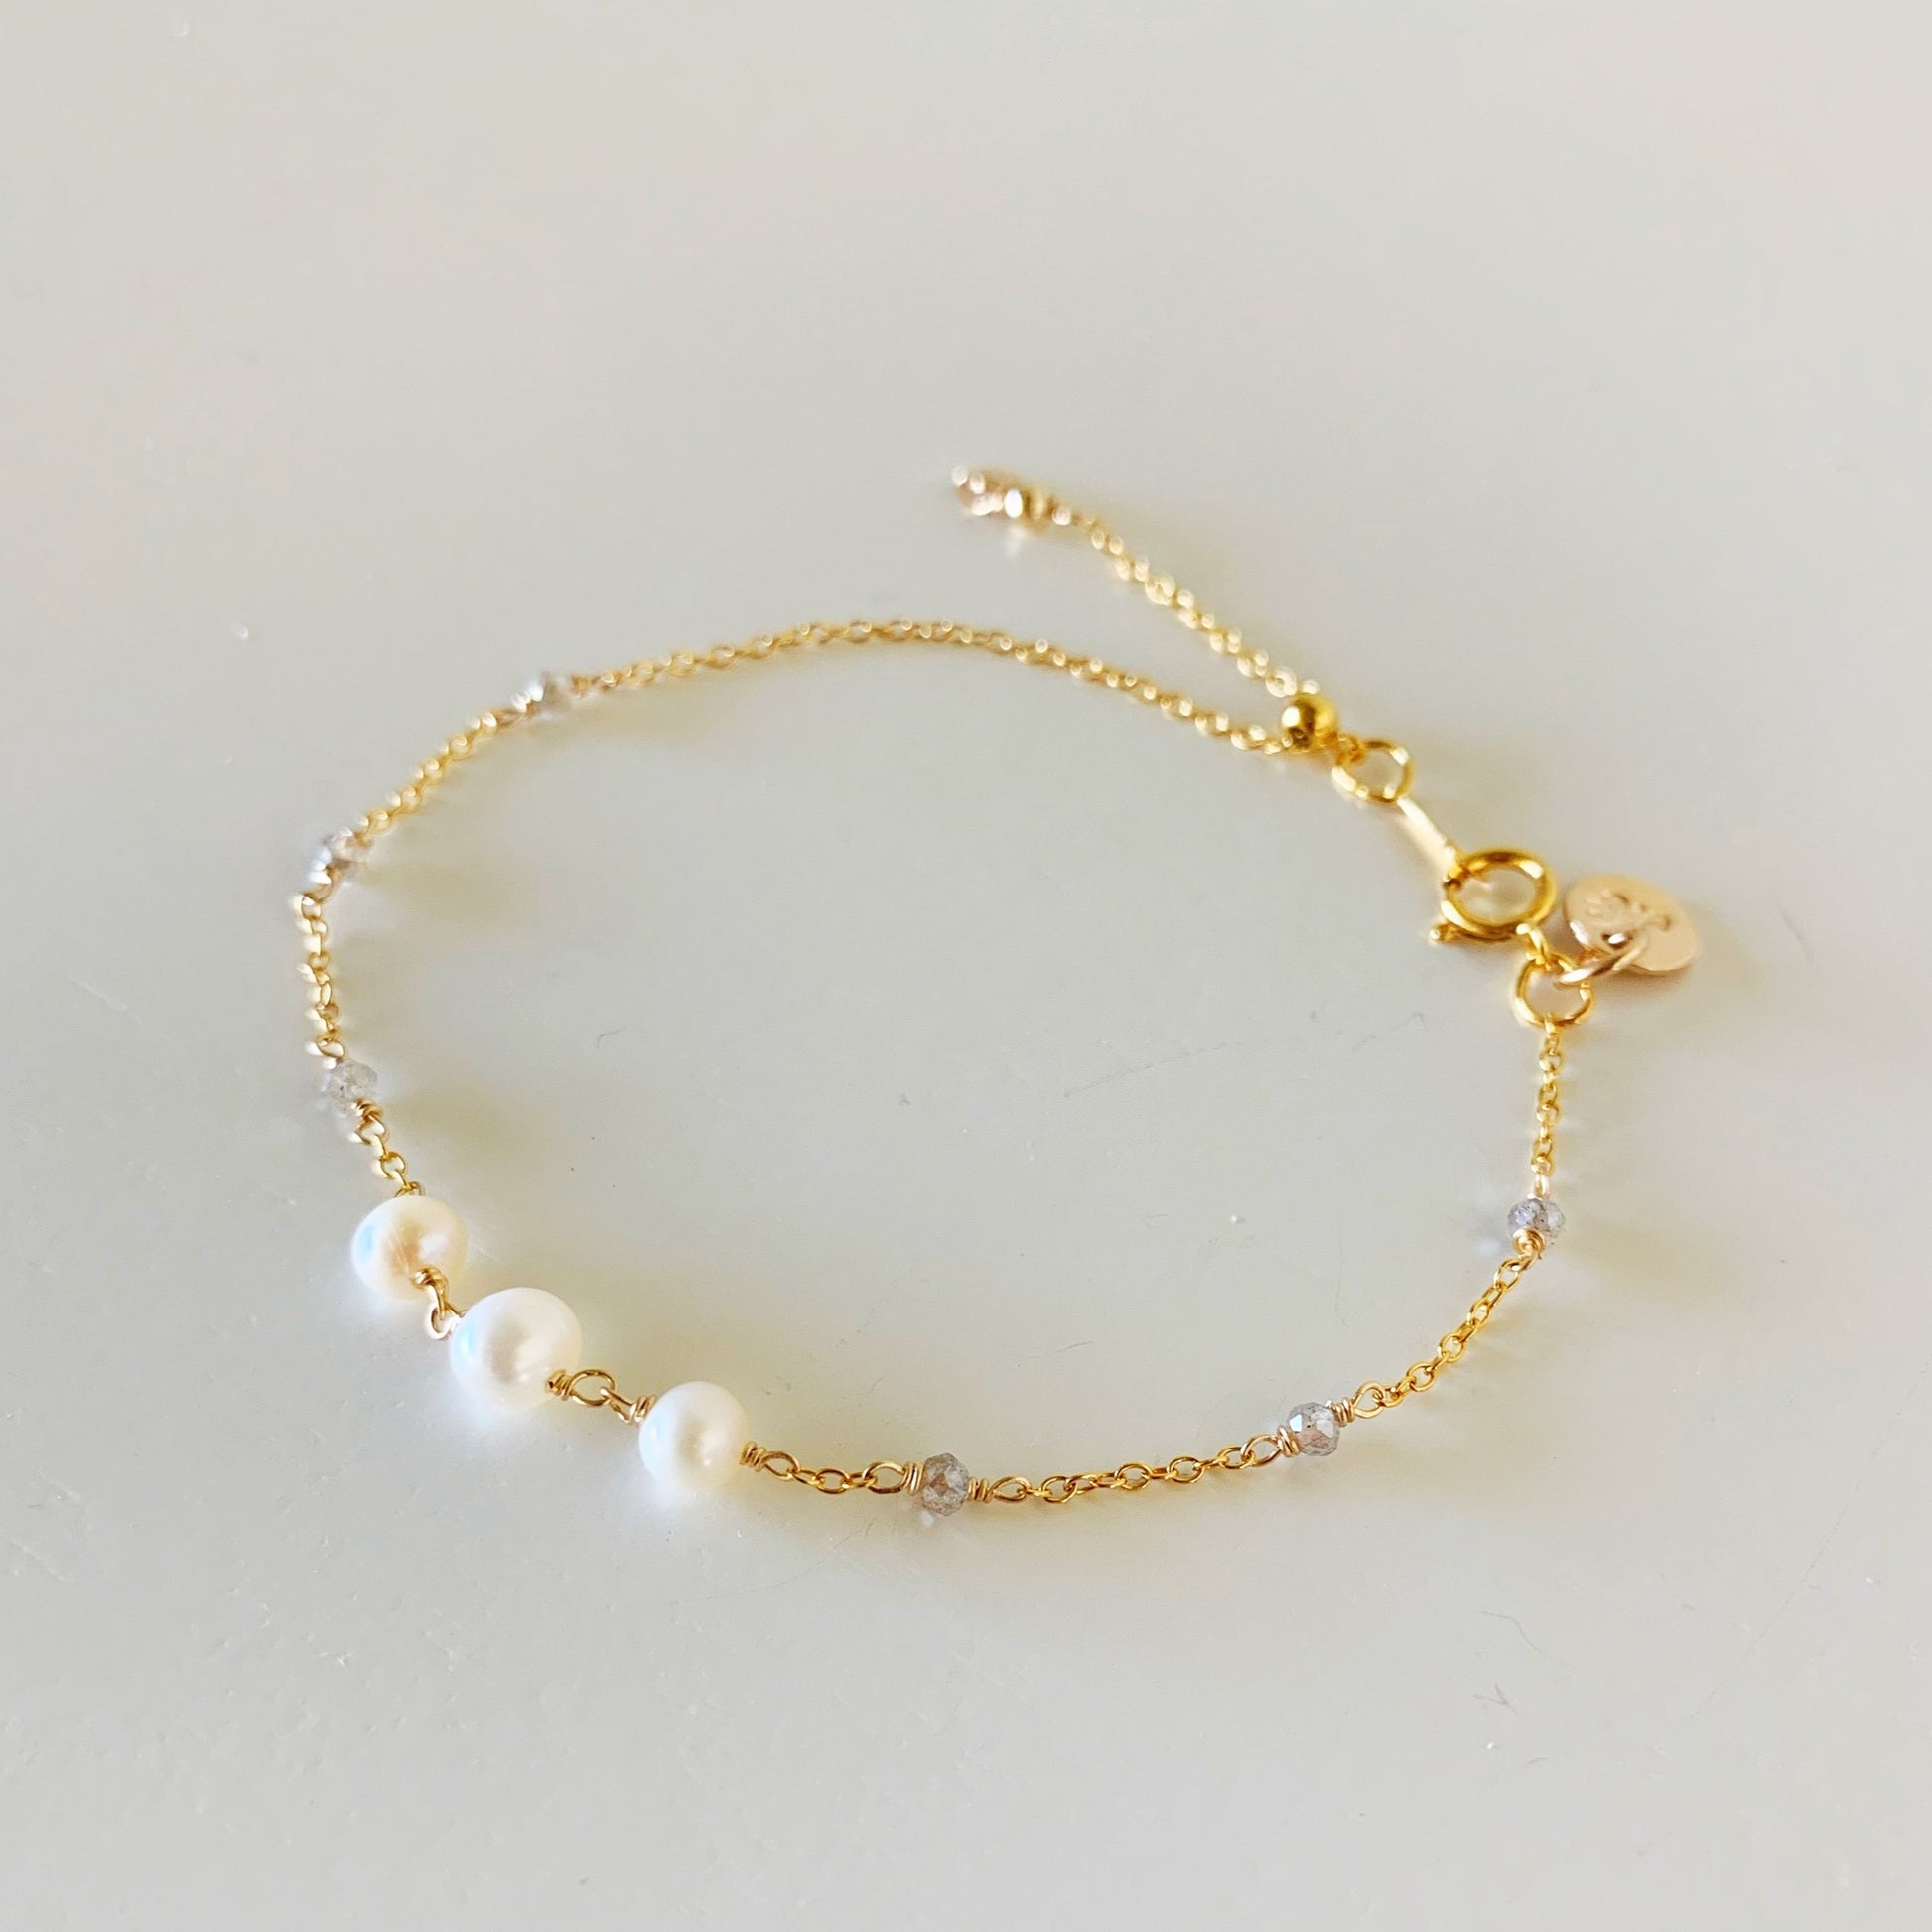 the westport bracelet by mermaids and madeleines is a 14k gold filled chain based design with an adjustable slide bead near the clasp to tighten the bracelet. this piece features 3 freshwater pearls at the center and has tiny microfacet labradorite beads on the sides of the chain. this bracelet is facing slightly left and photographed from a top down angle on a white surface